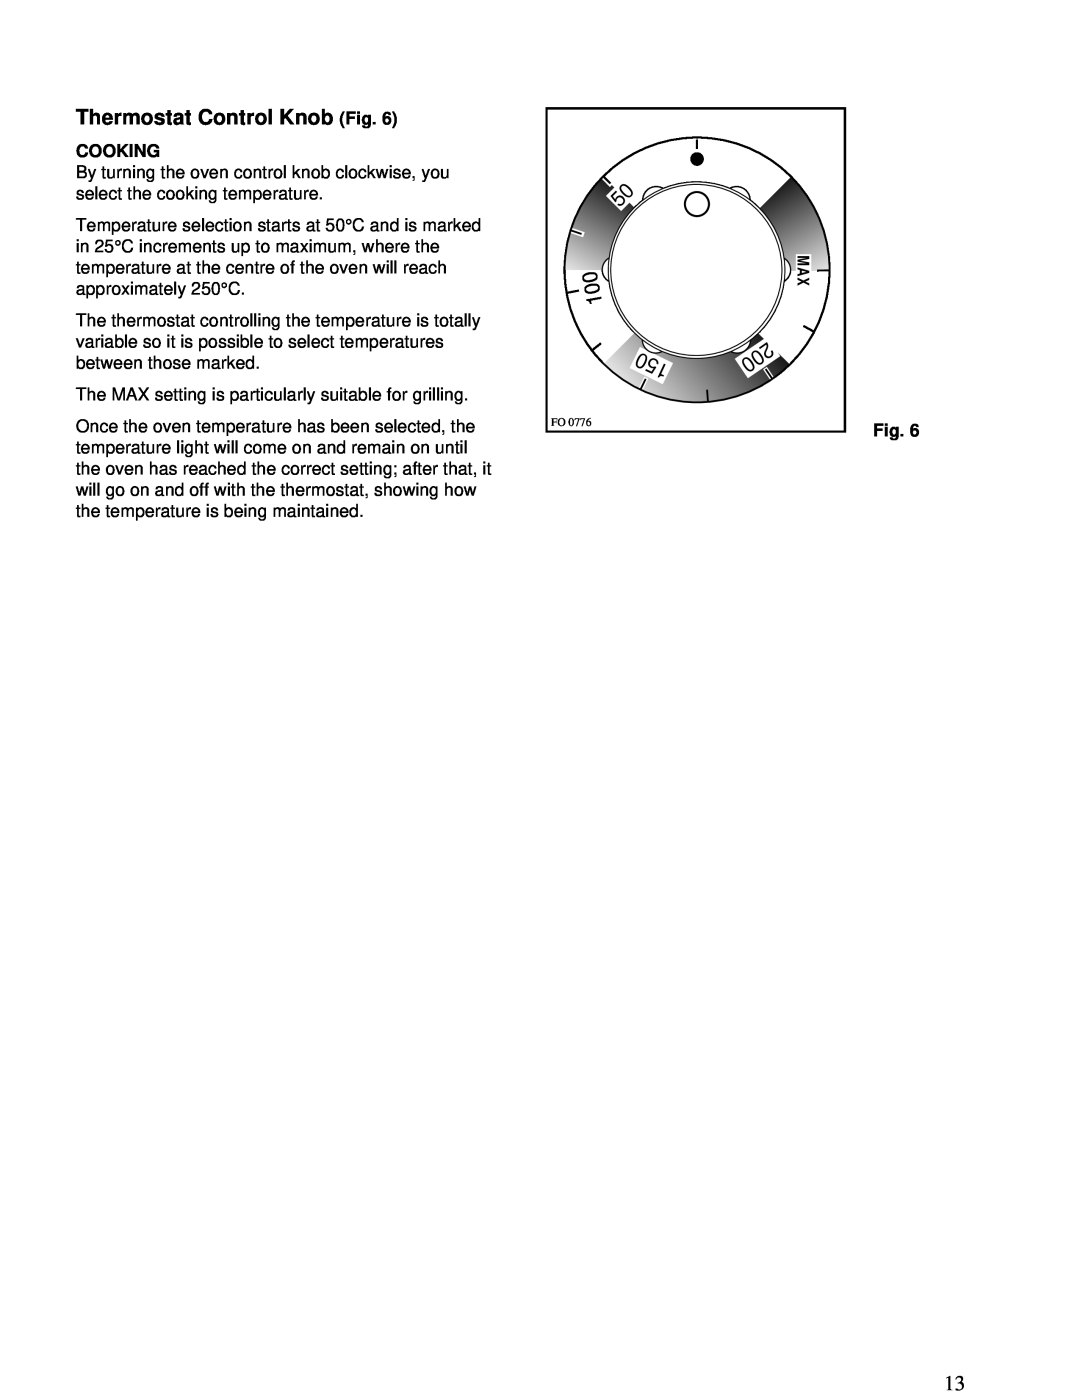 Zanussi ZBD 902 installation manual Thermostat Control Knob Fig, Cooking 